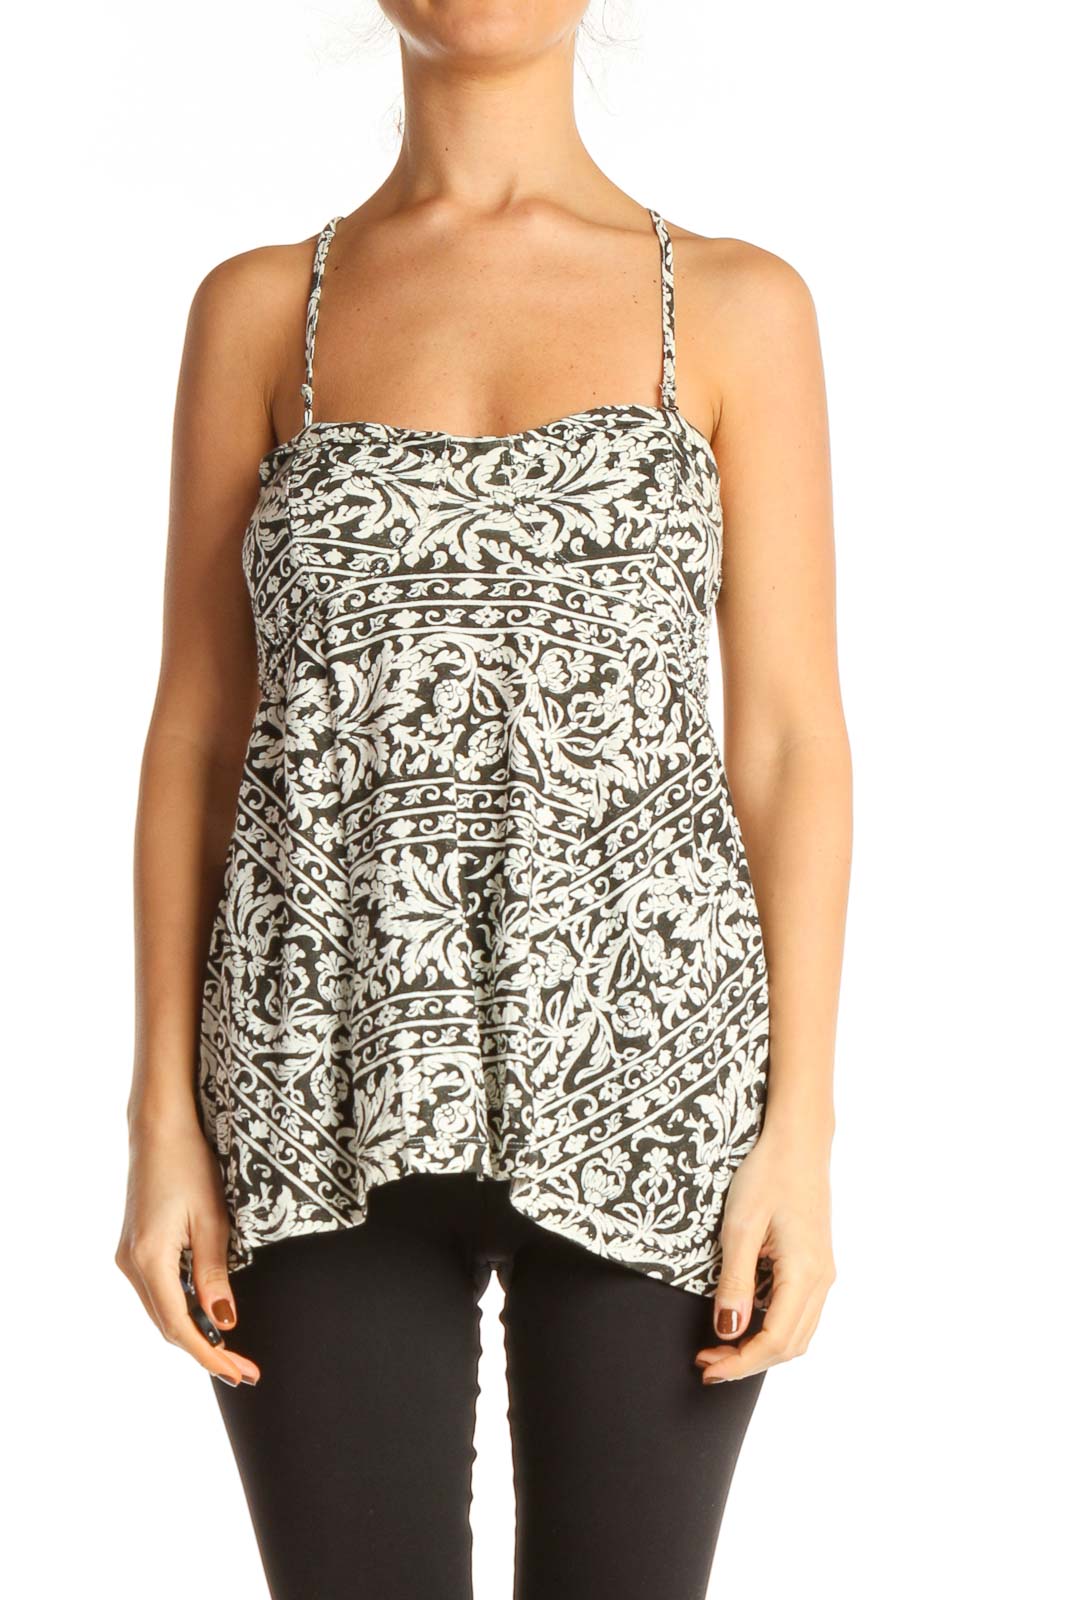 White Printed Casual Tank Top Front